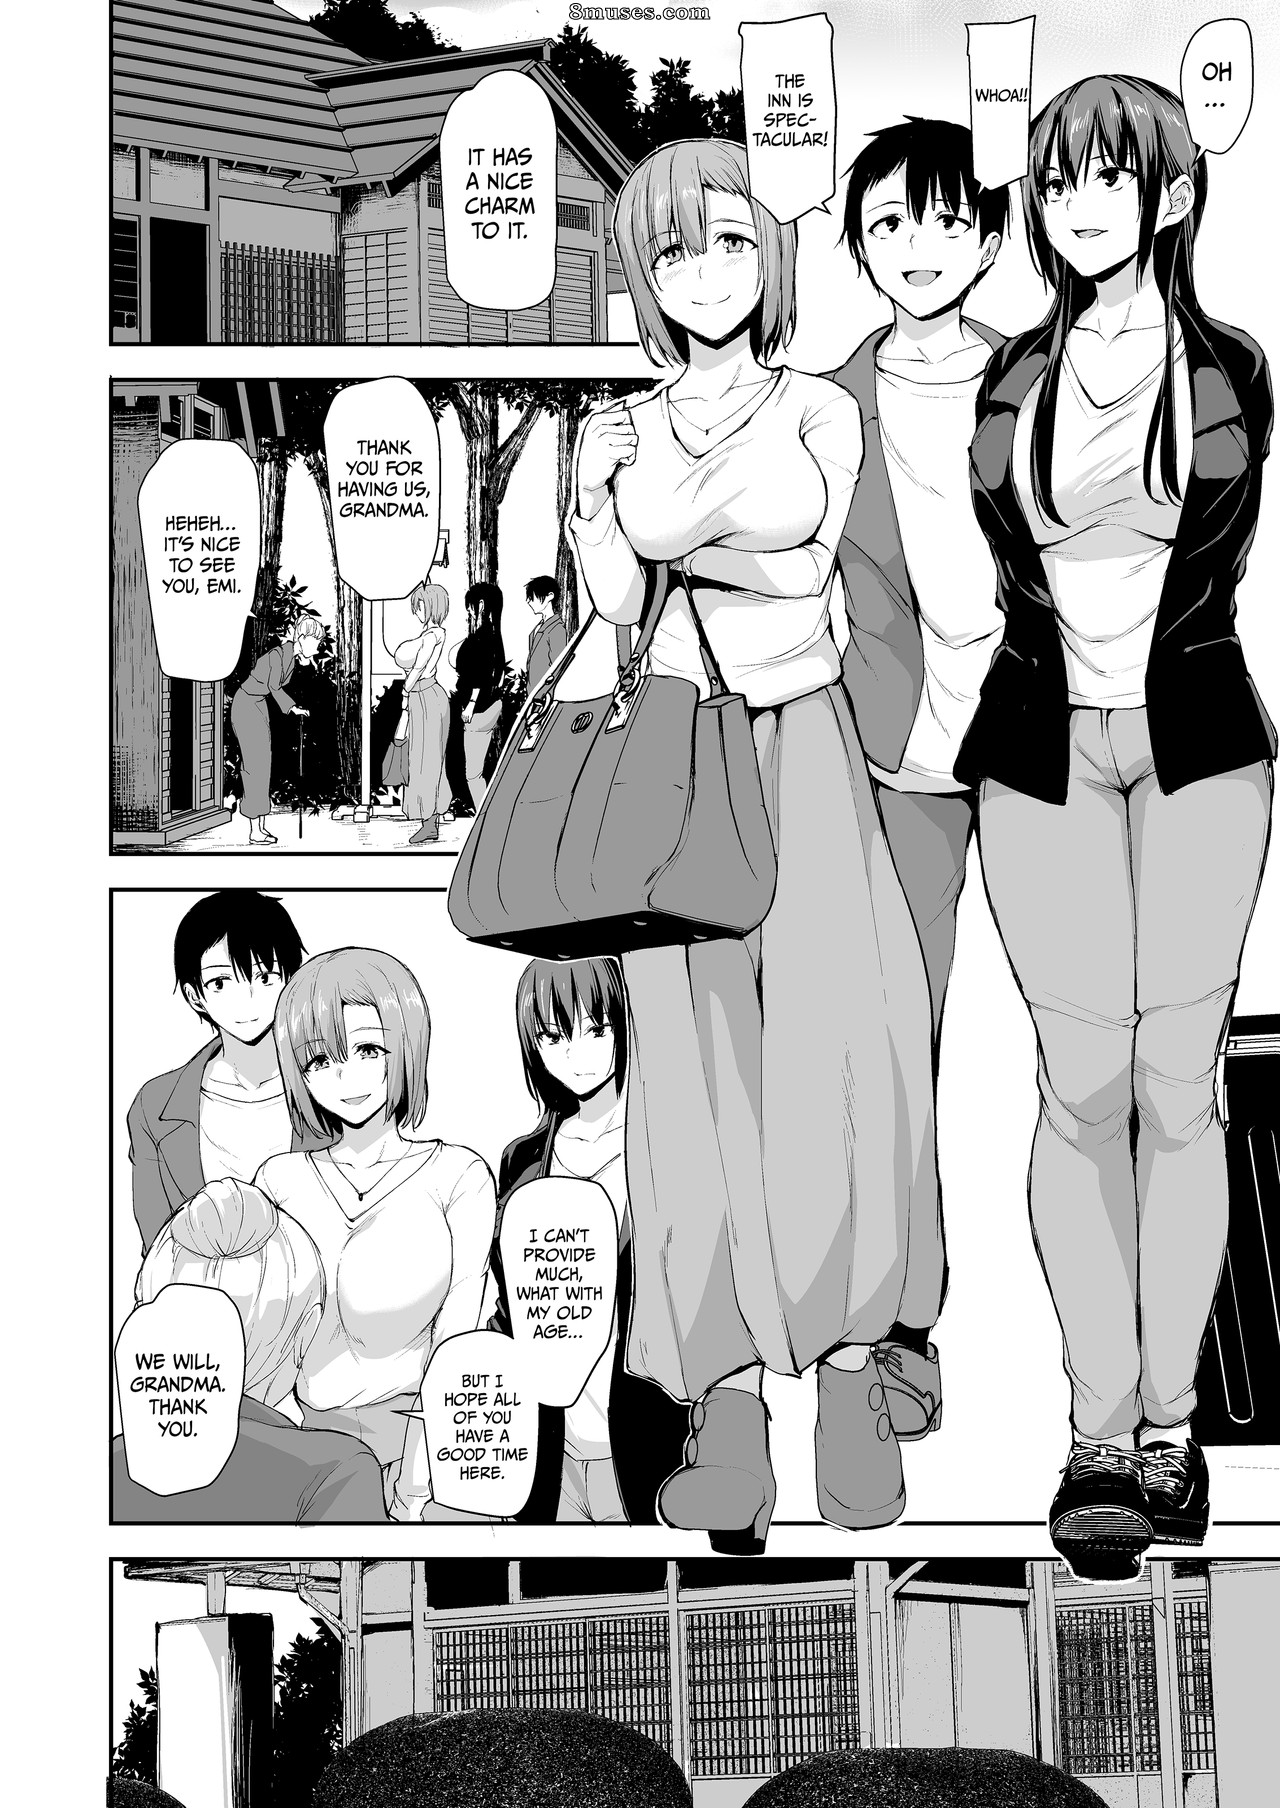 Page 5 Fakku-Comics/SHIMA-PAN-Tachibana-Omina/I-Cant-Get-it-Up-Without-Two-Pairs-of-Big- Breasts-So-My-Wife-Brought-Her-Friend-2 8muses